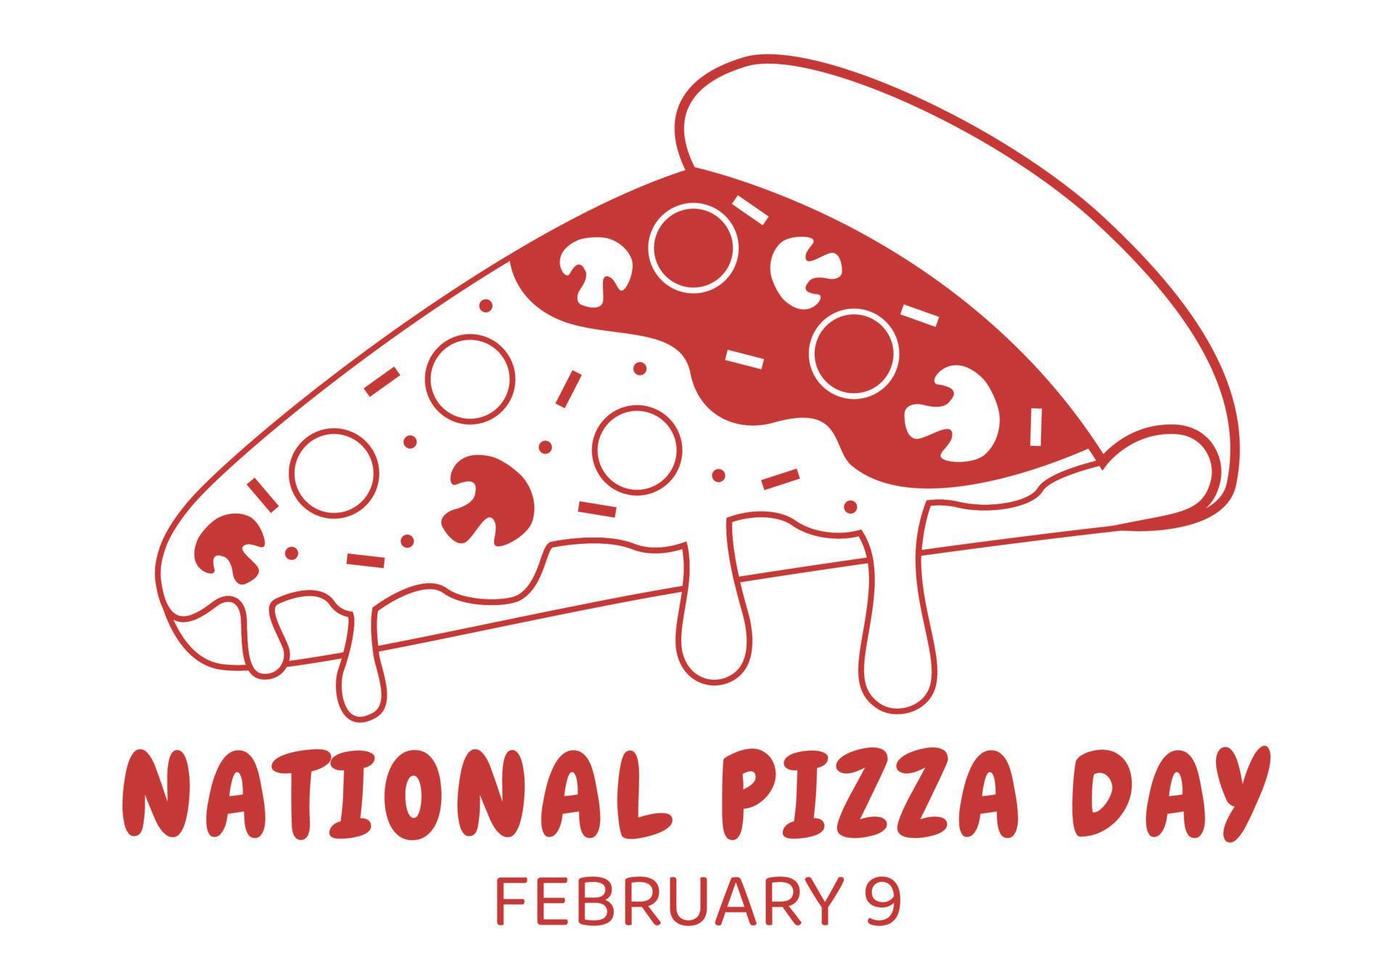 National Pizza Day on Celebration February 9 by Consuming Various Slice in Flat Cartoon Style Background Hand Drawn Templates Illustration vector